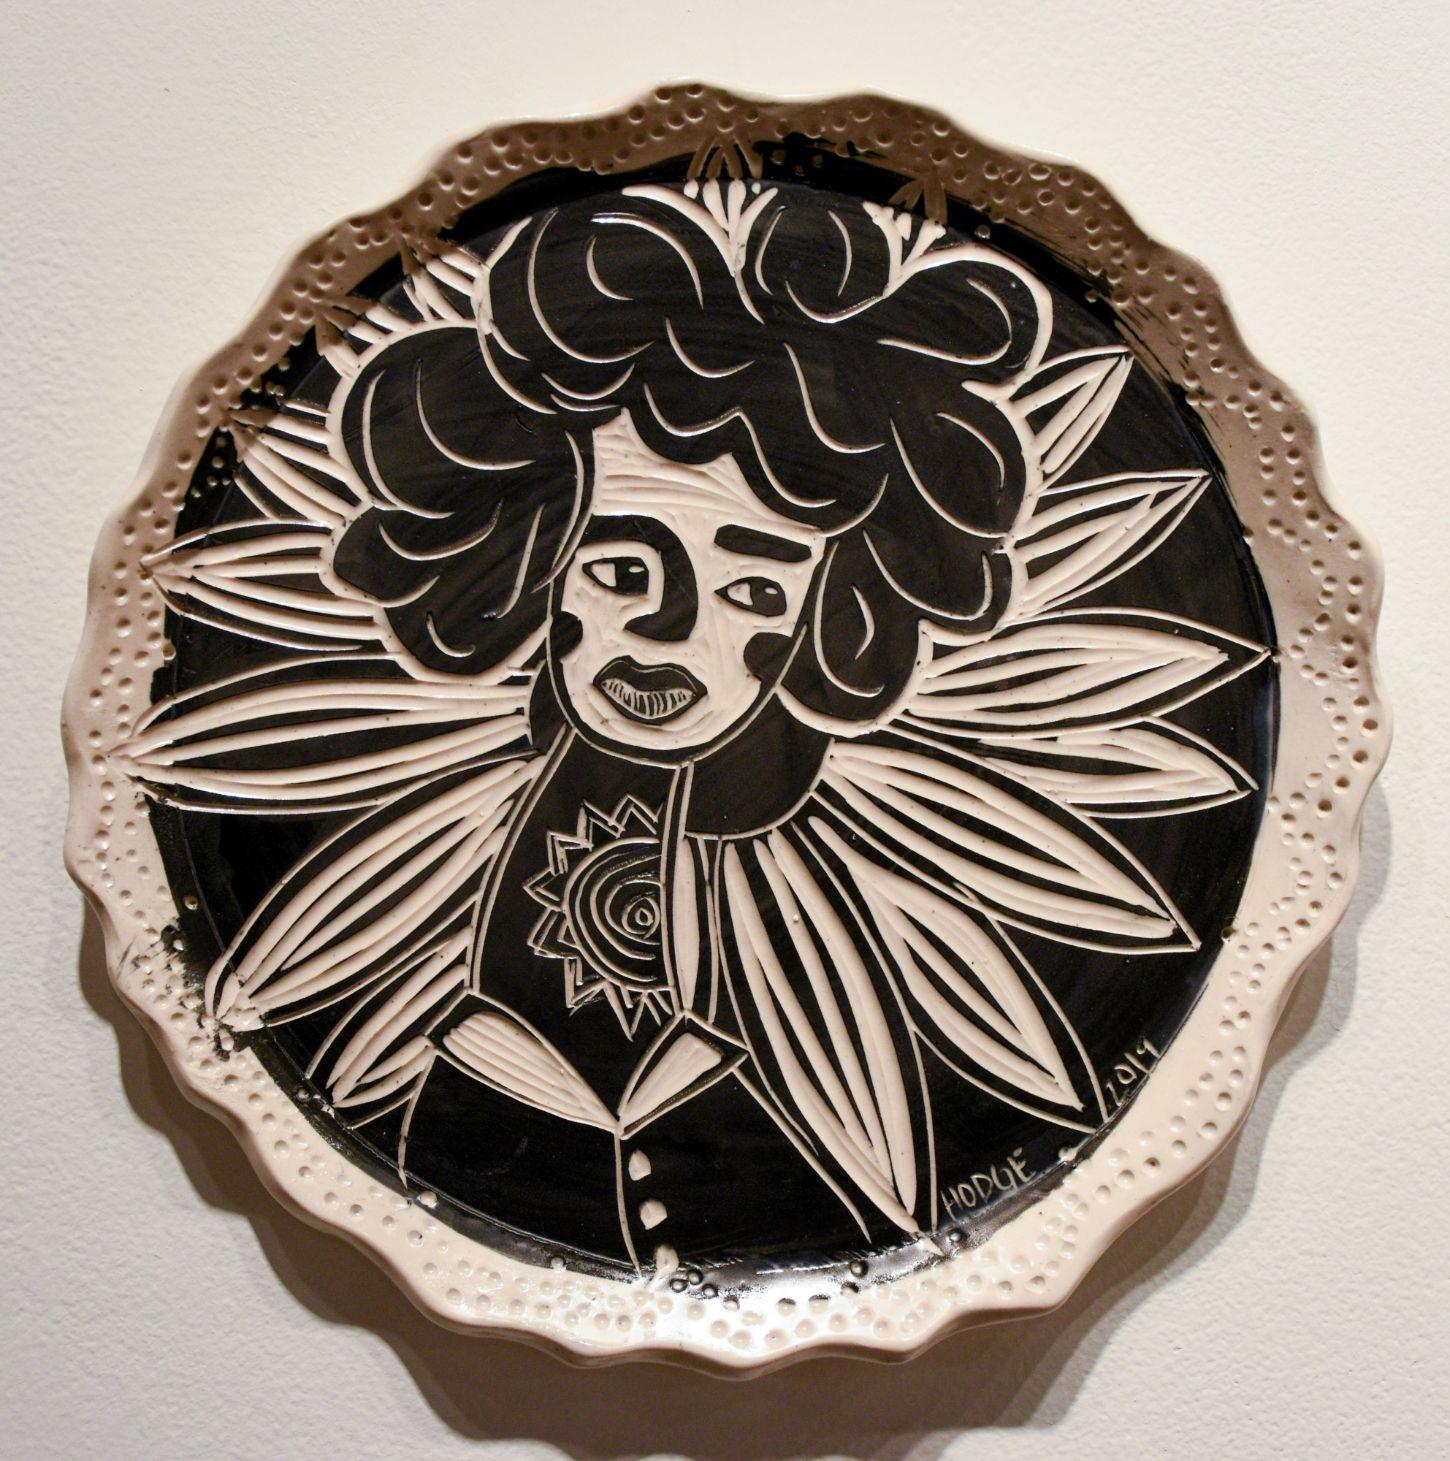 Inherent Light, Portrait, 2019 by Alex Hodge
Hand carved porcelain plate 
Height: 11 in x Diameter: 11 in
Unique

Her poetic porcelain plates examine and reimagine the history of art in a way that values women, not only in body, but in wholeness,